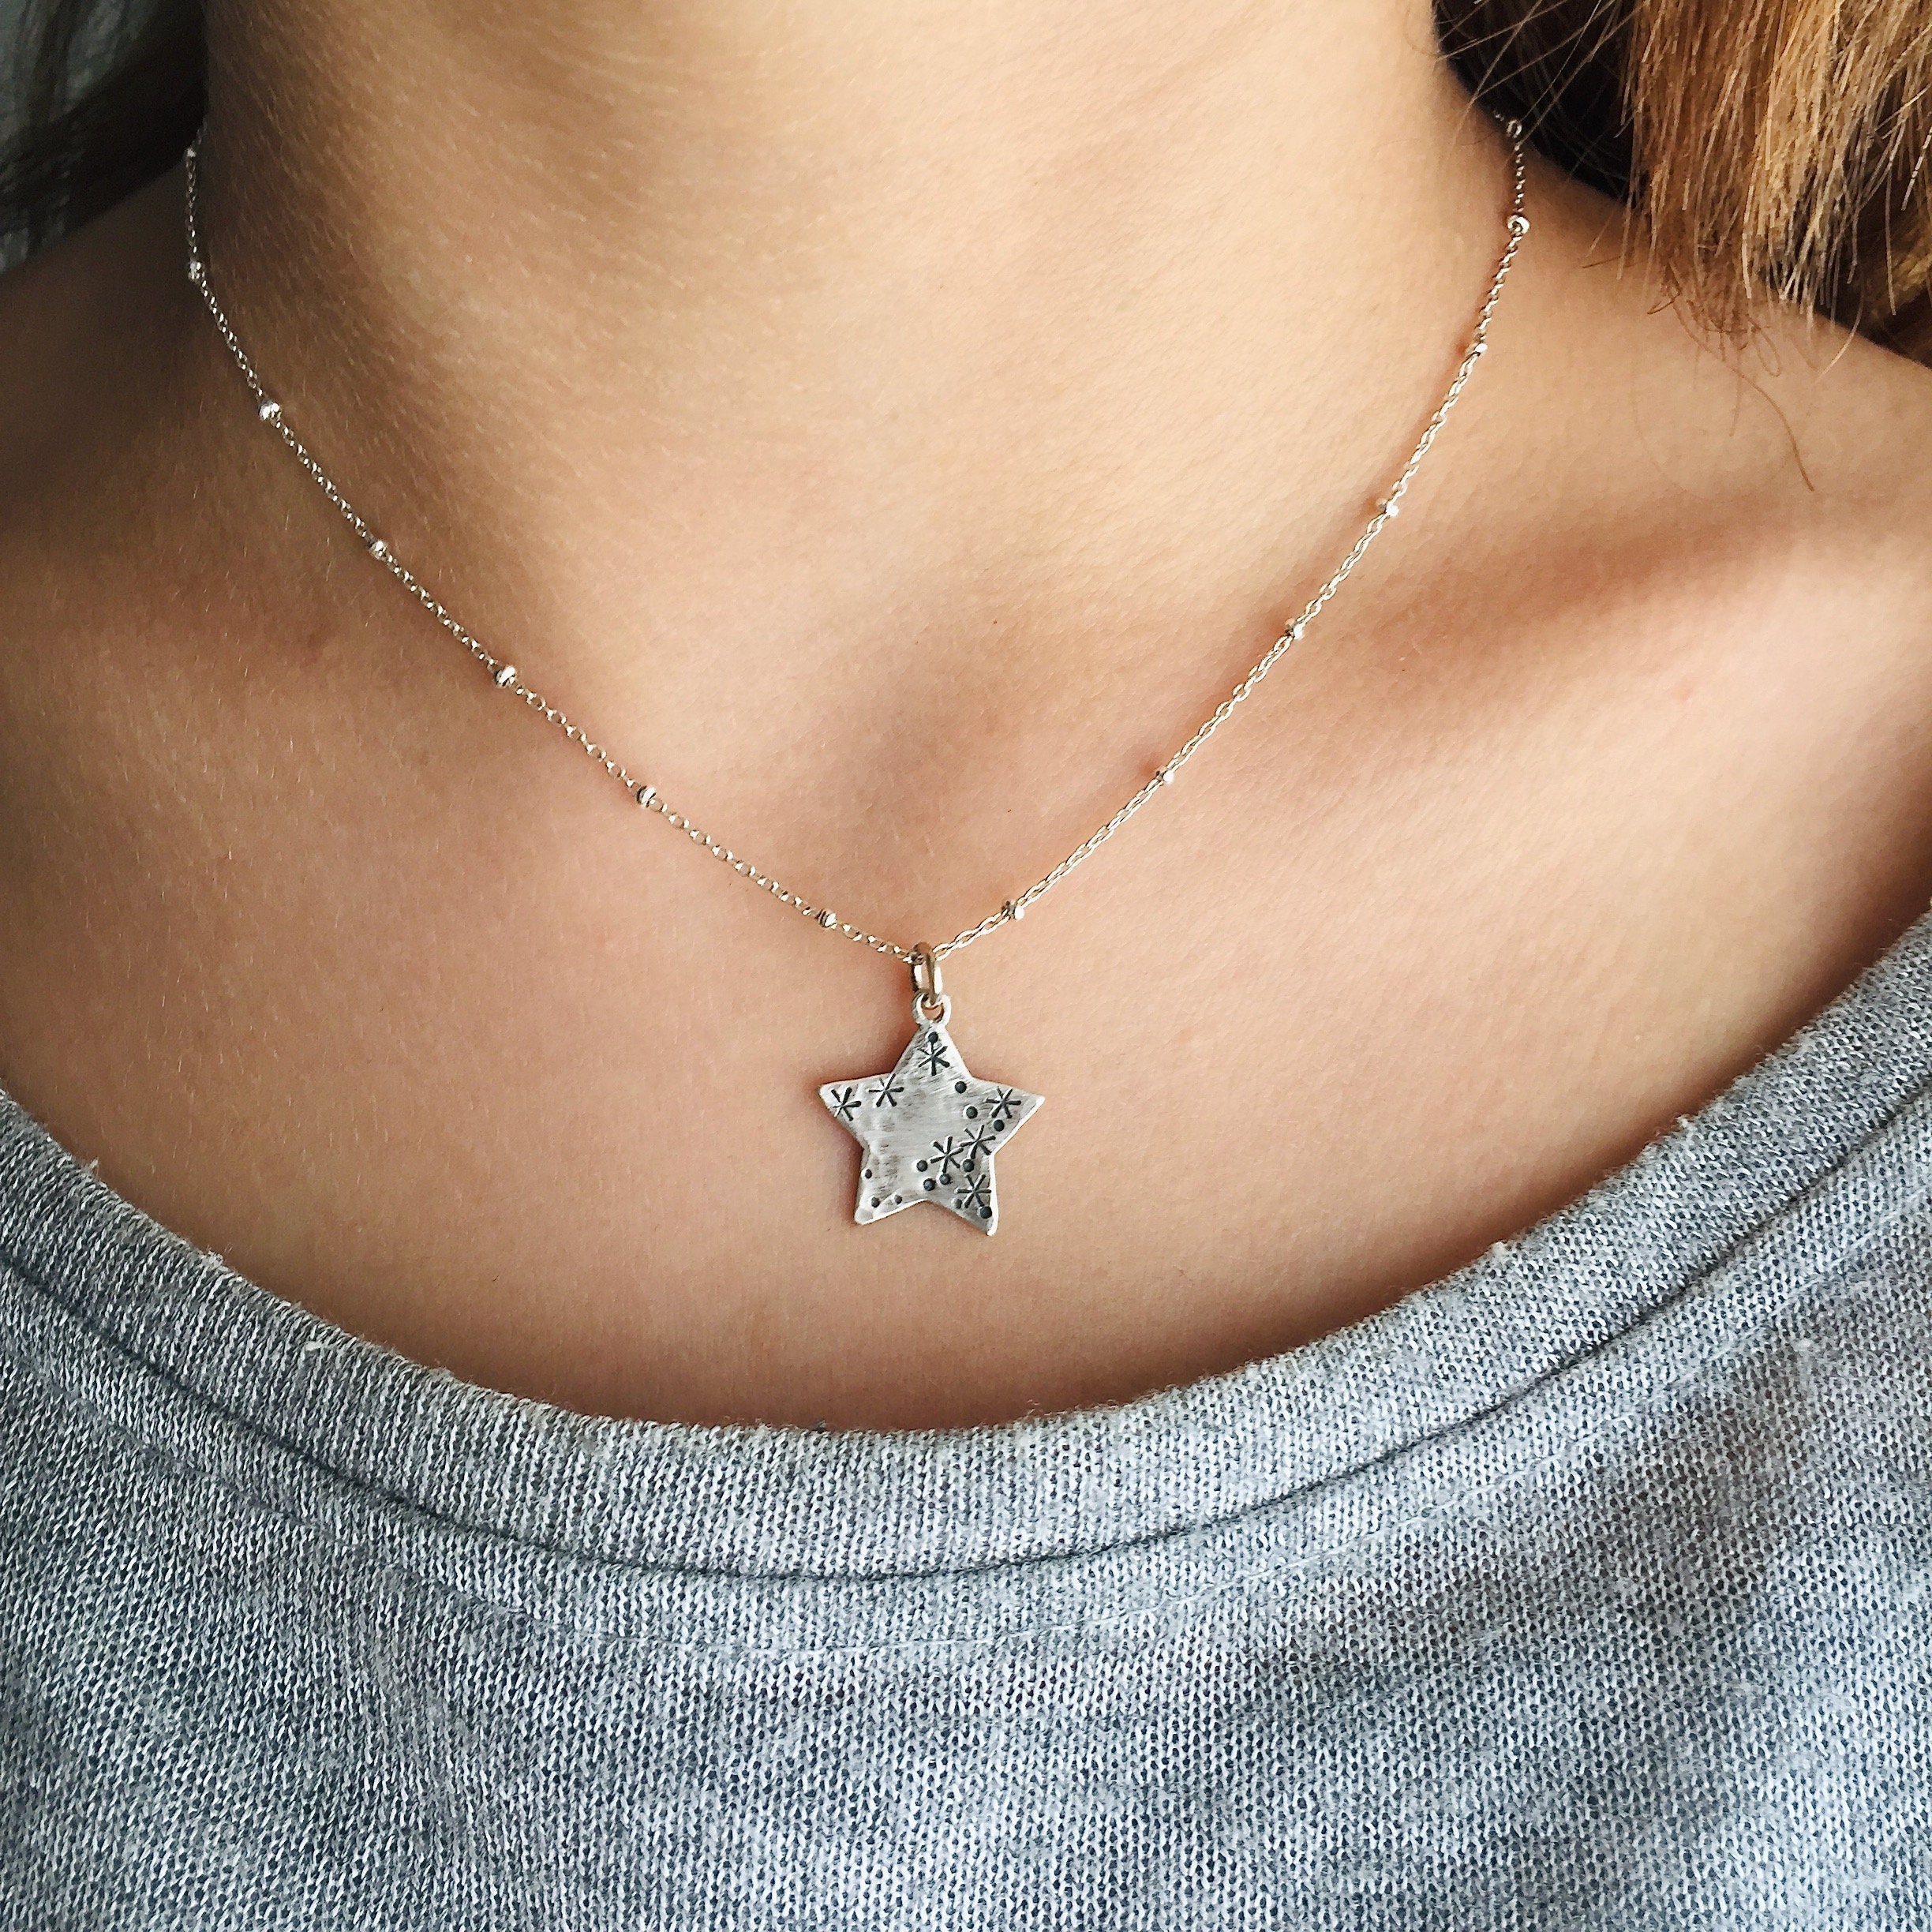 Silver Star Necklace - Sterling Silver Pendant - Women's Jewelry Gold